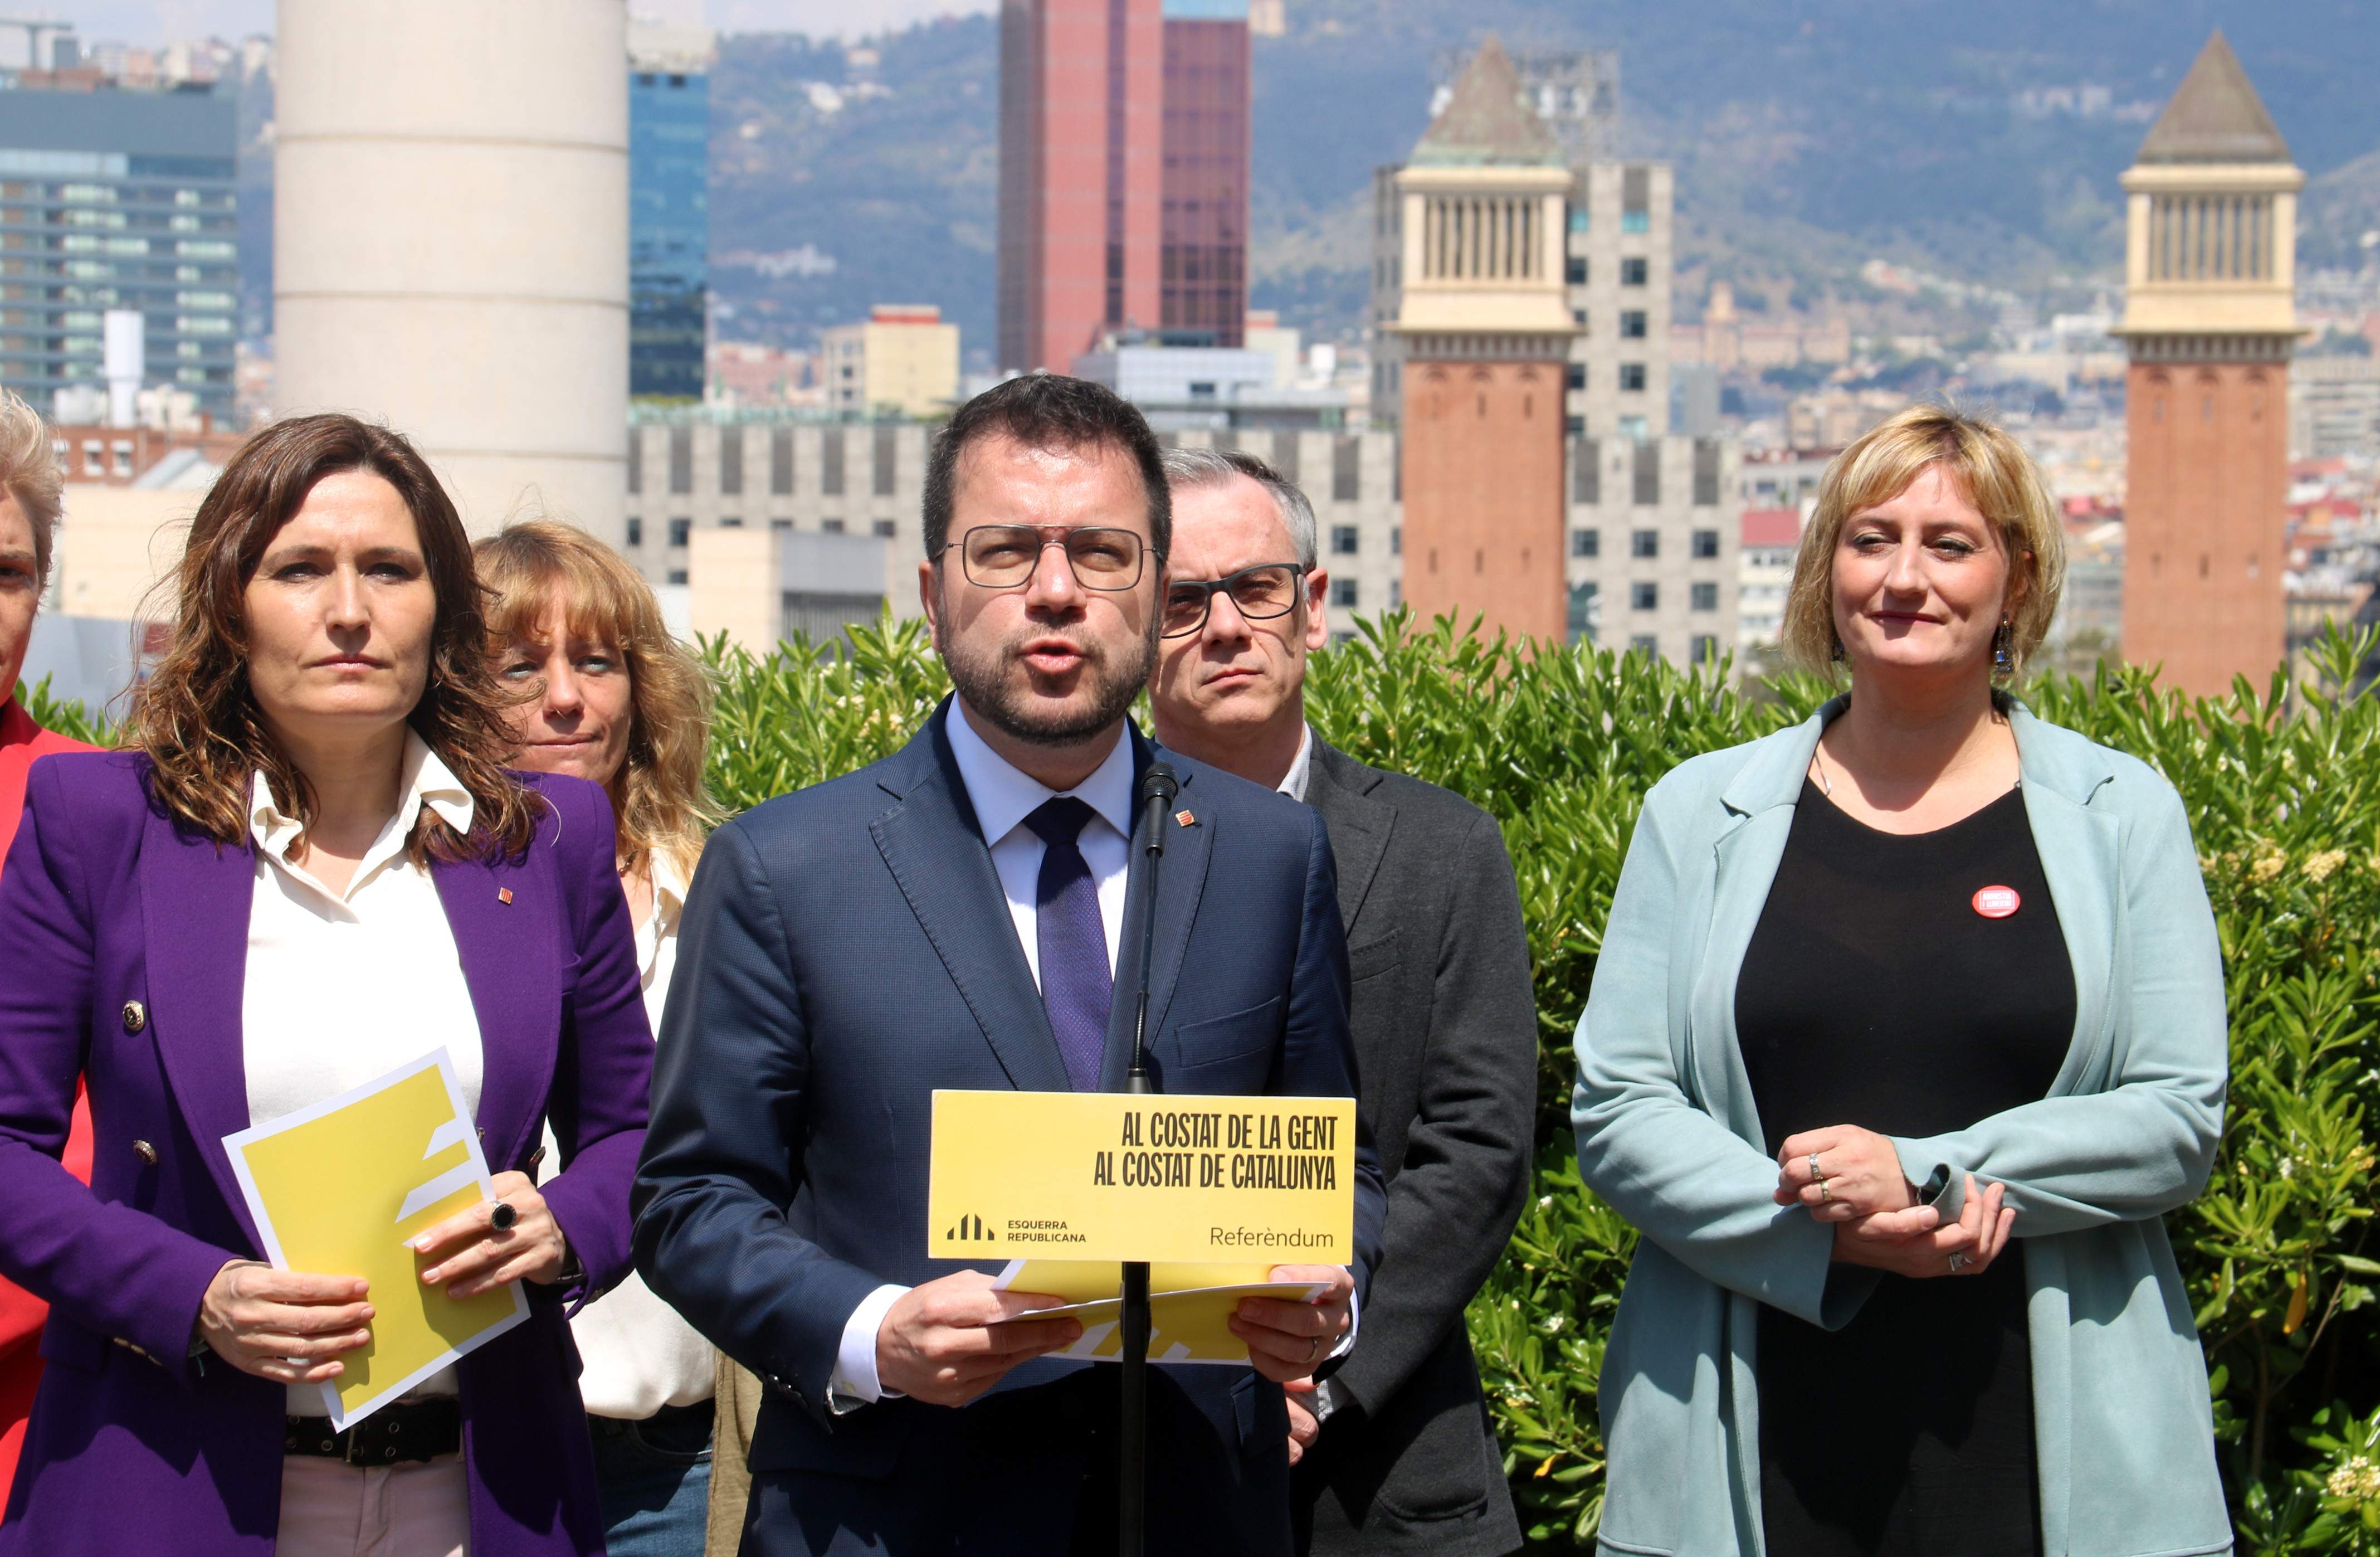 Aragonès says Junts and Puigdemont are now copying ERC's policies after disdaining them